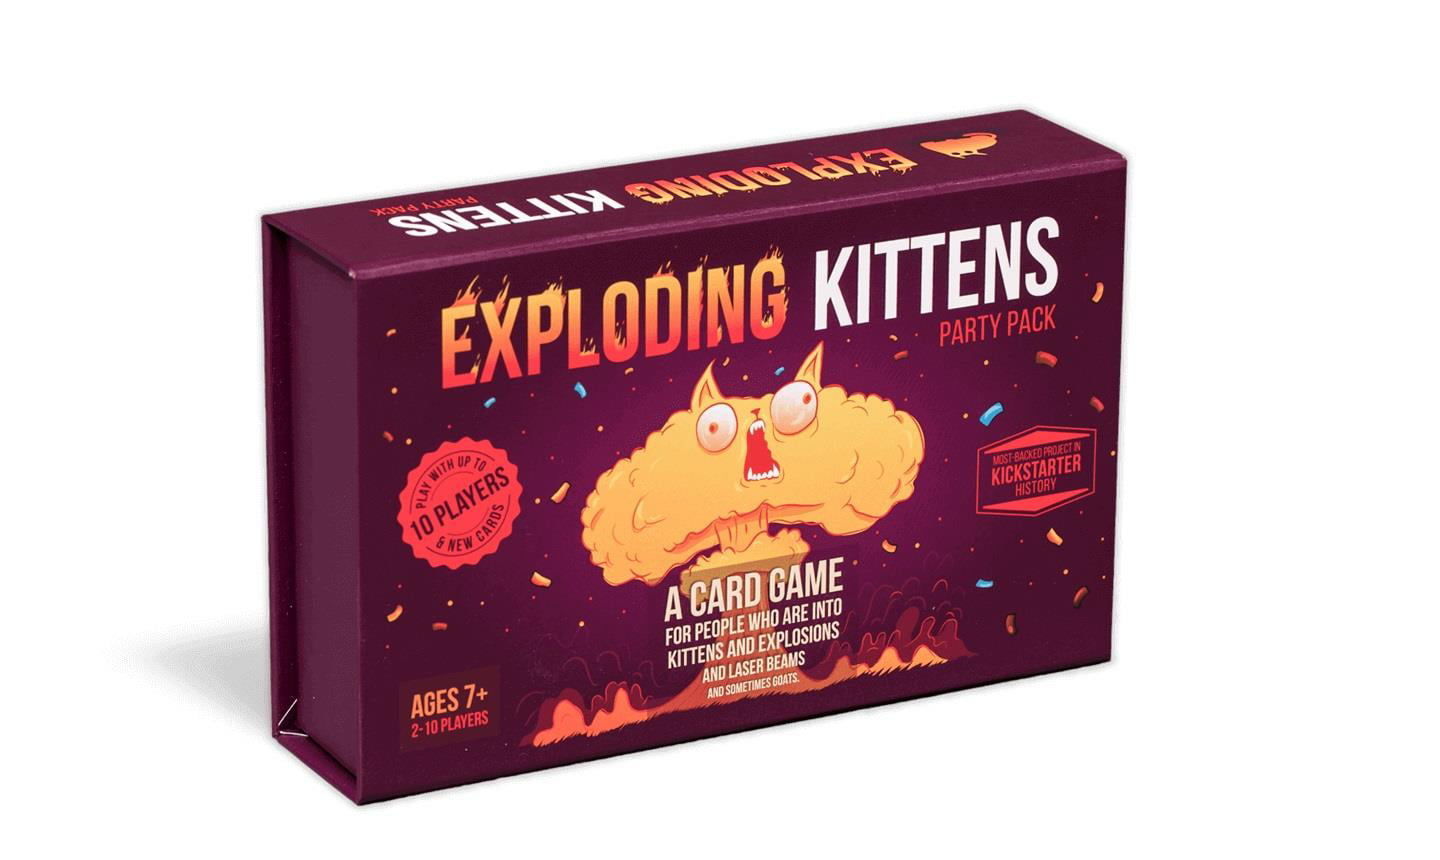 Party Pack Game by Exploding Kittens